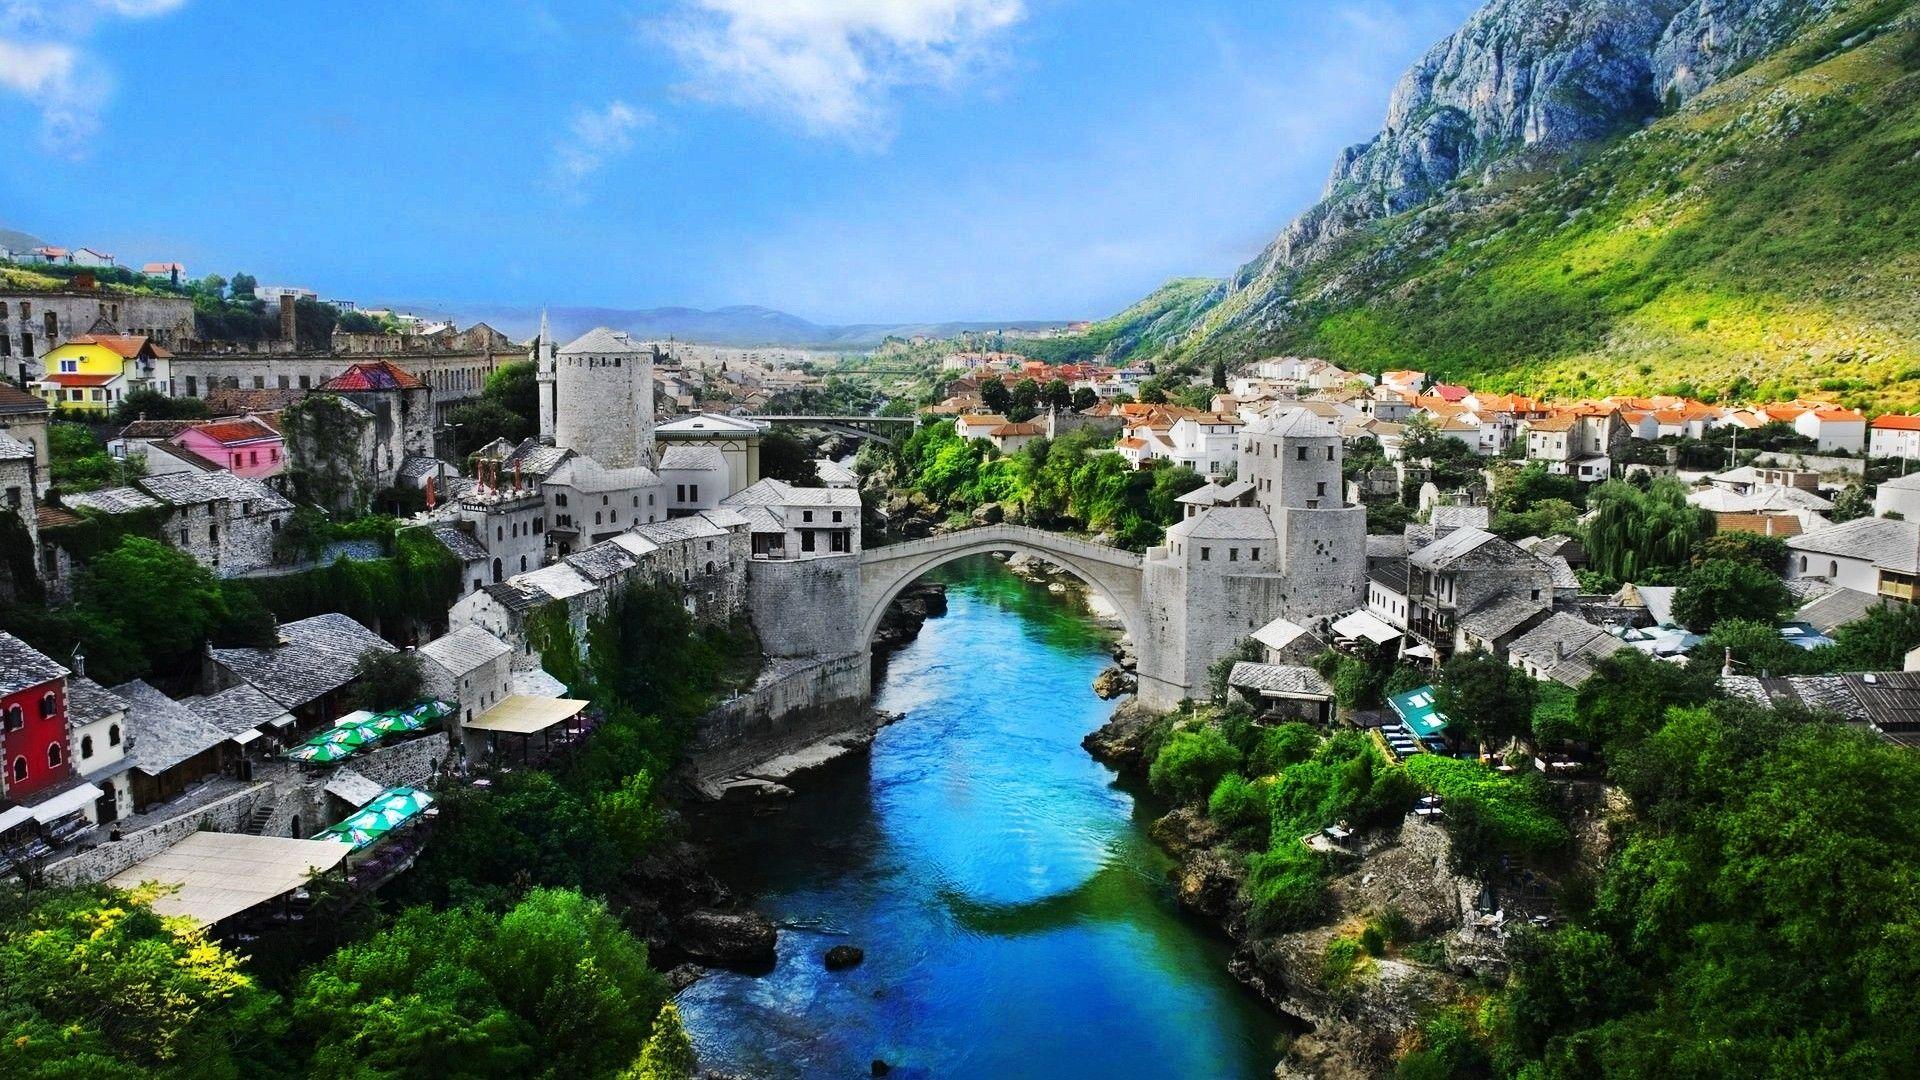 Download Wallpaper 1920x1080 Bosnia and herzegovina, Mostar old town